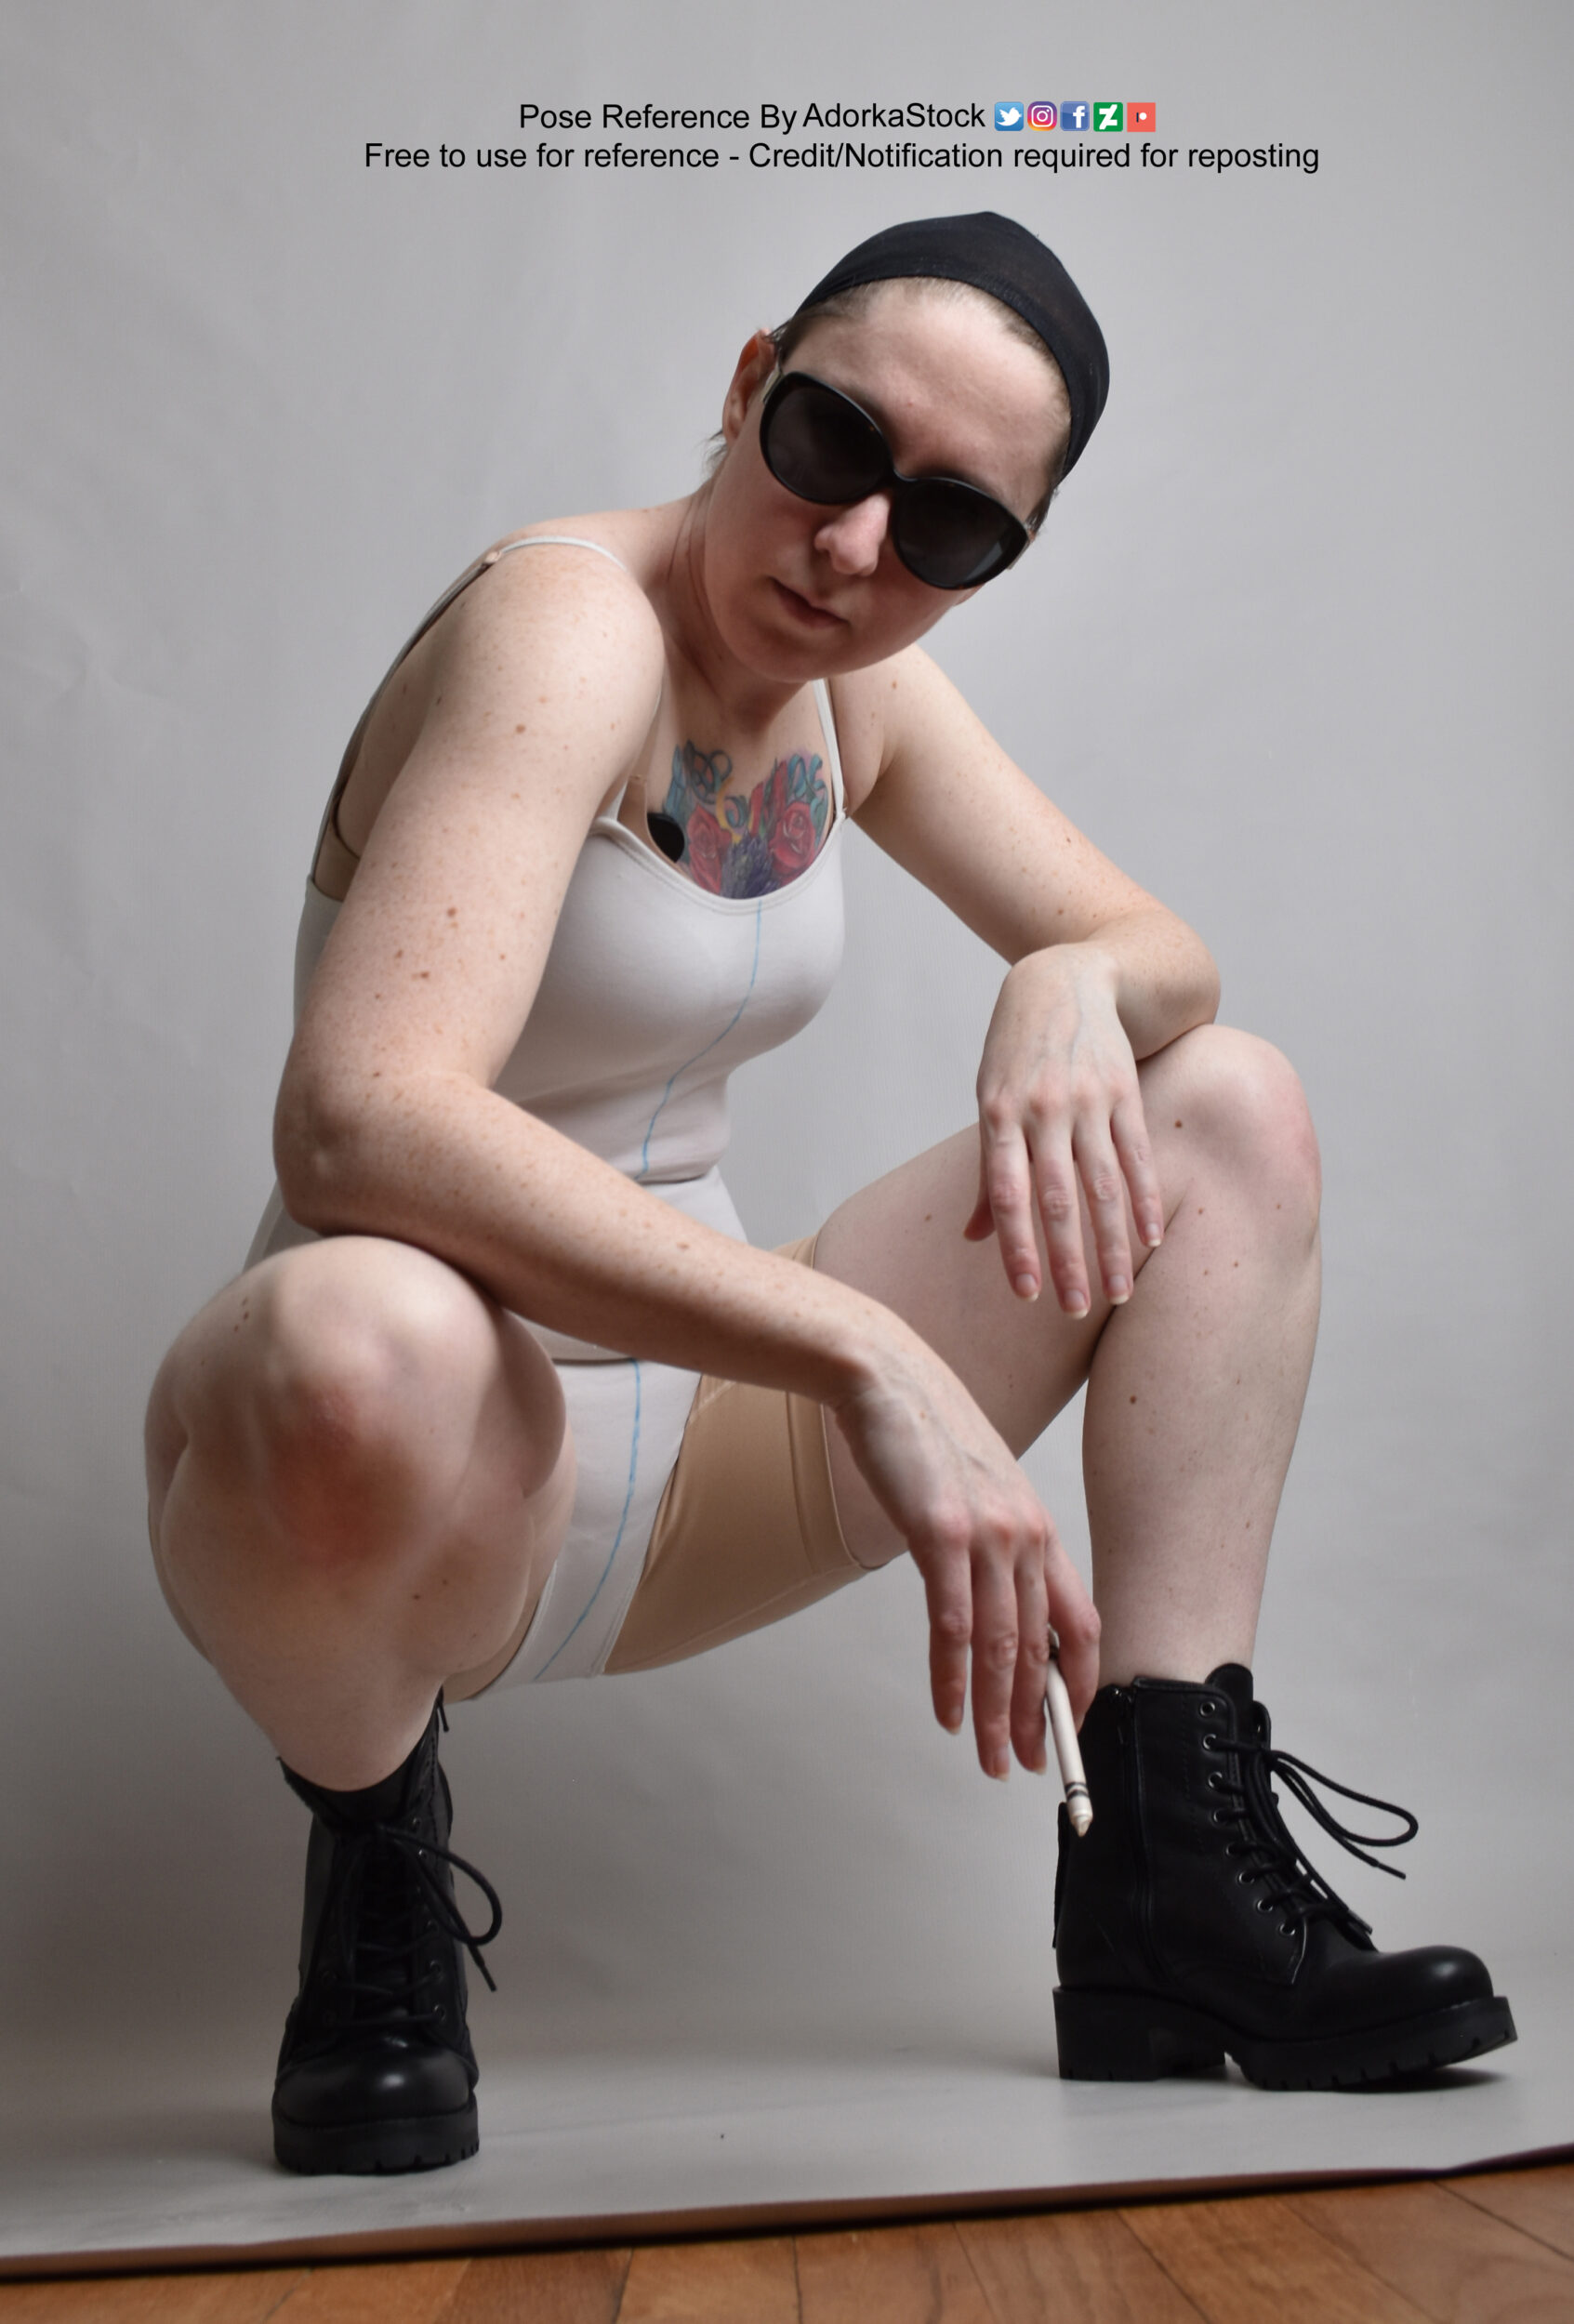 Thin, white, female pose reference model in crouching pose with a crayon held like a cigarette, sunglasses, and big black boots. It's from a low angle.